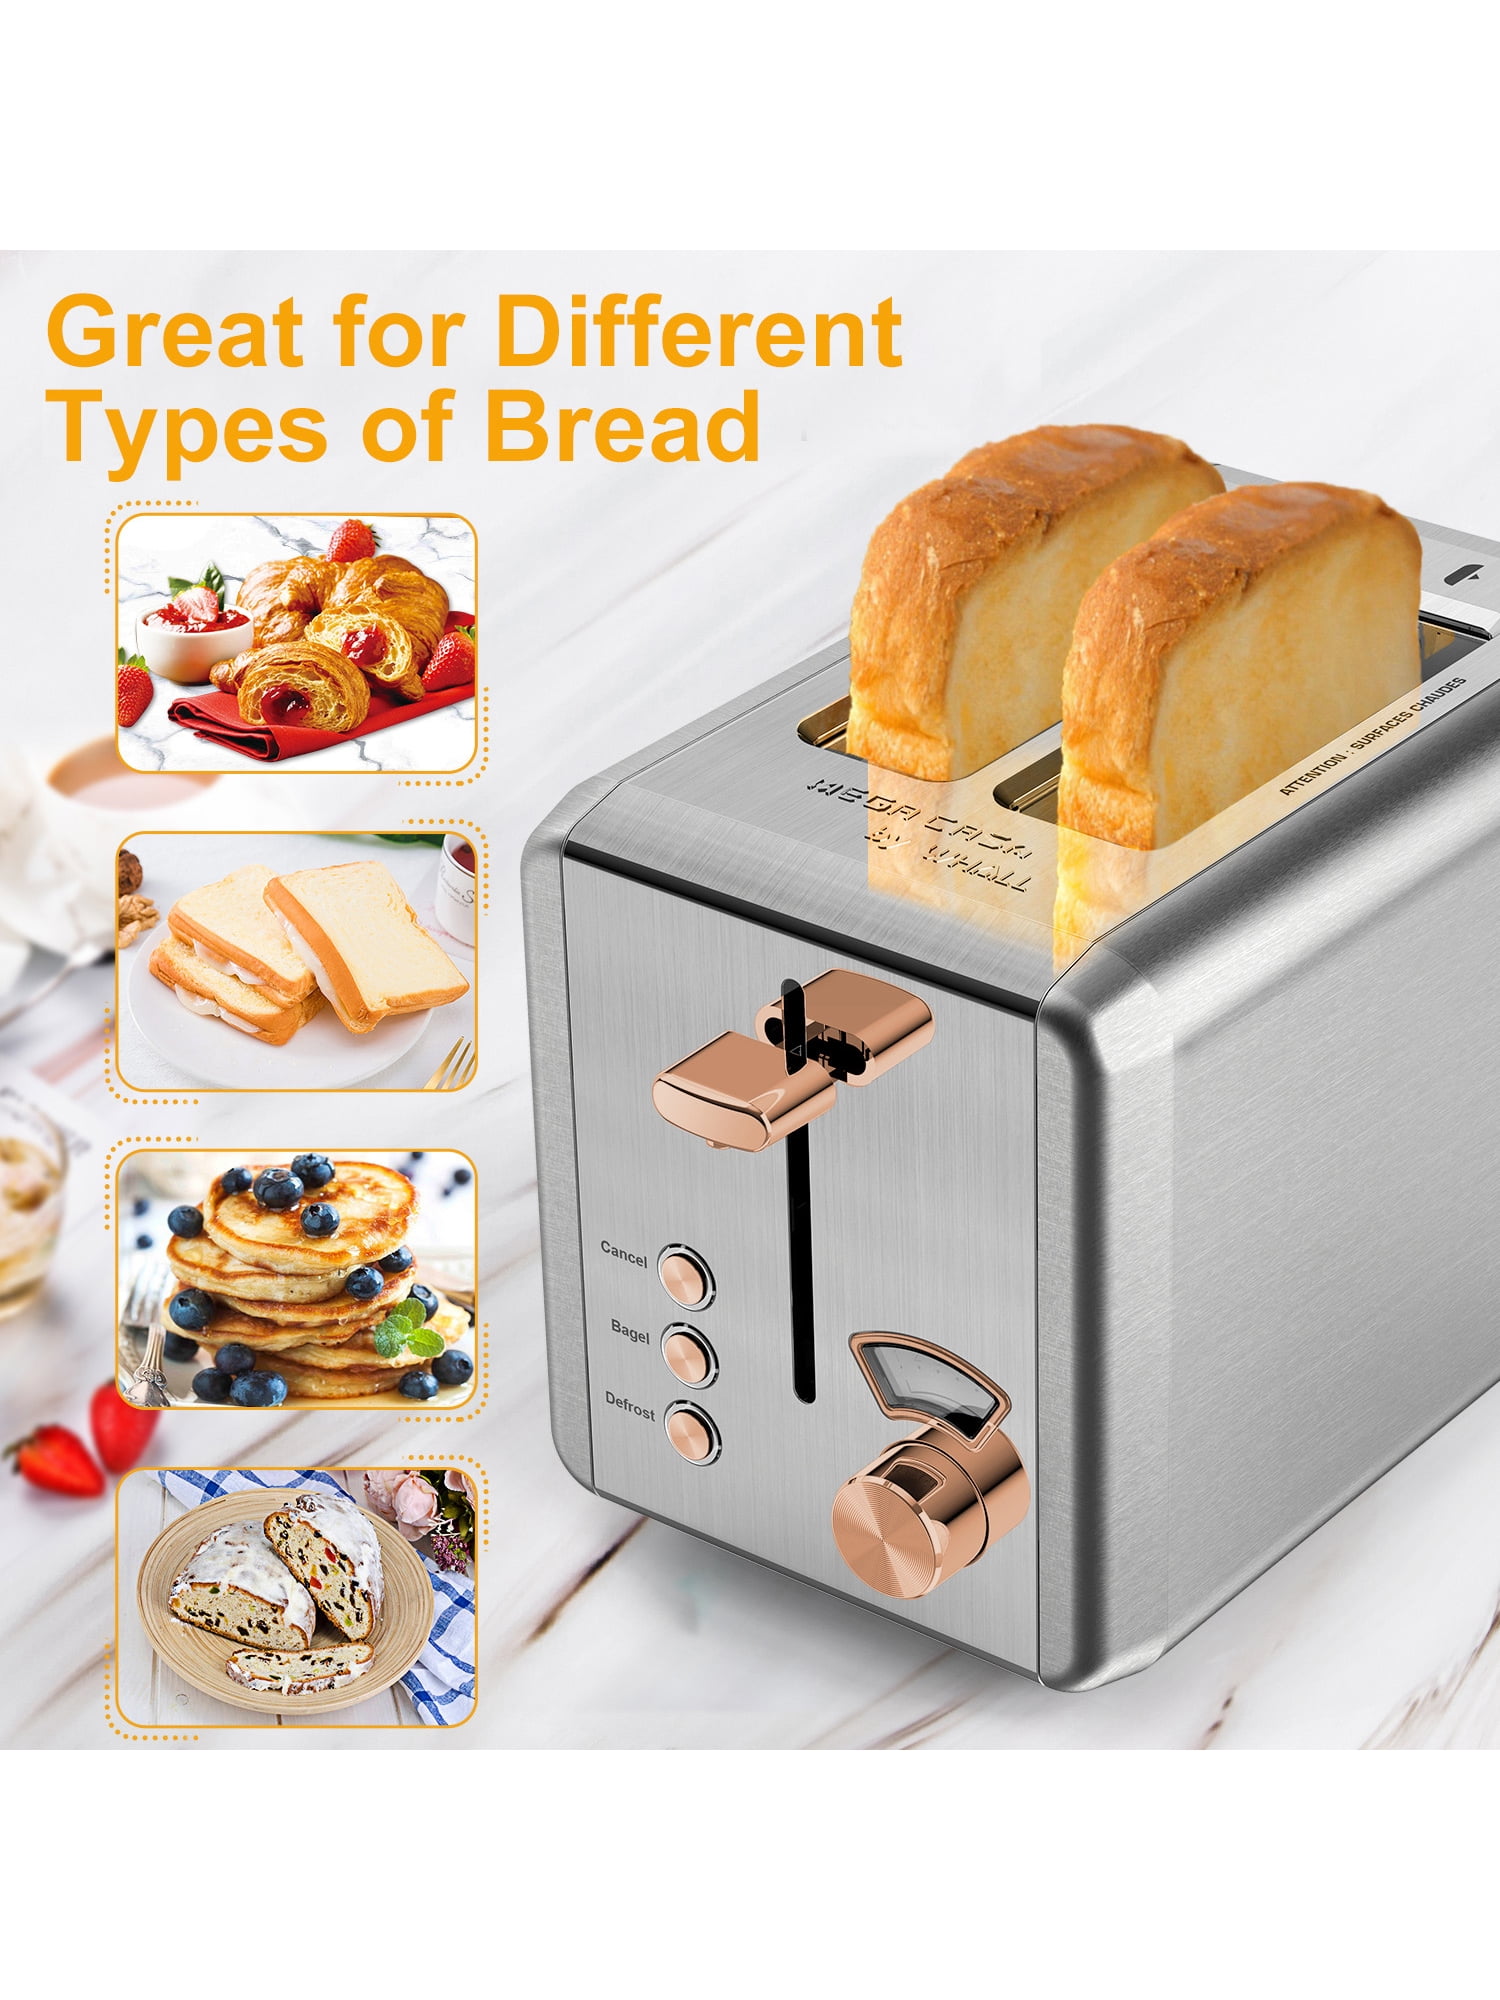 Toaster 2 Slice, Stainless Steel Toaster with Touch LCD Display (6 Toasting  Settings), 2 Extra-Wide Slots, Bagel, Cancel, Defrost, and Reheat Function,  Slide Out Crumb Tray, Silver – AICOOK